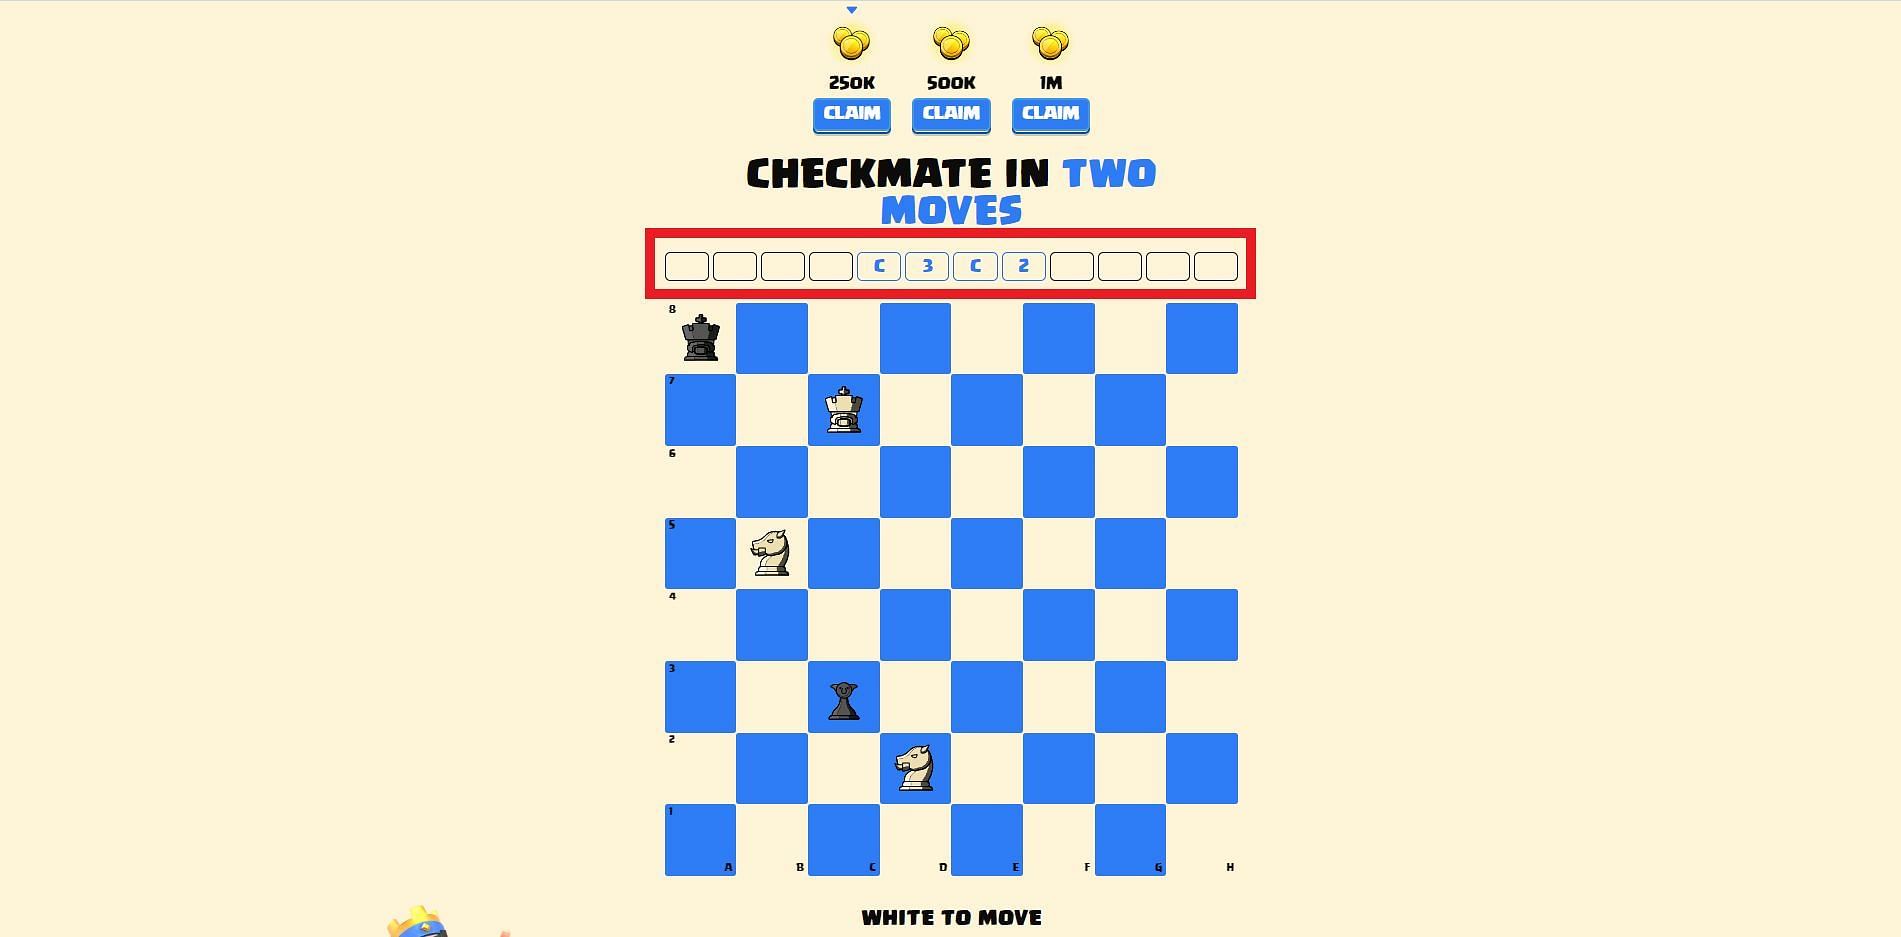 How Can You Checkmate in Two Moves with a Queen and King in Chess